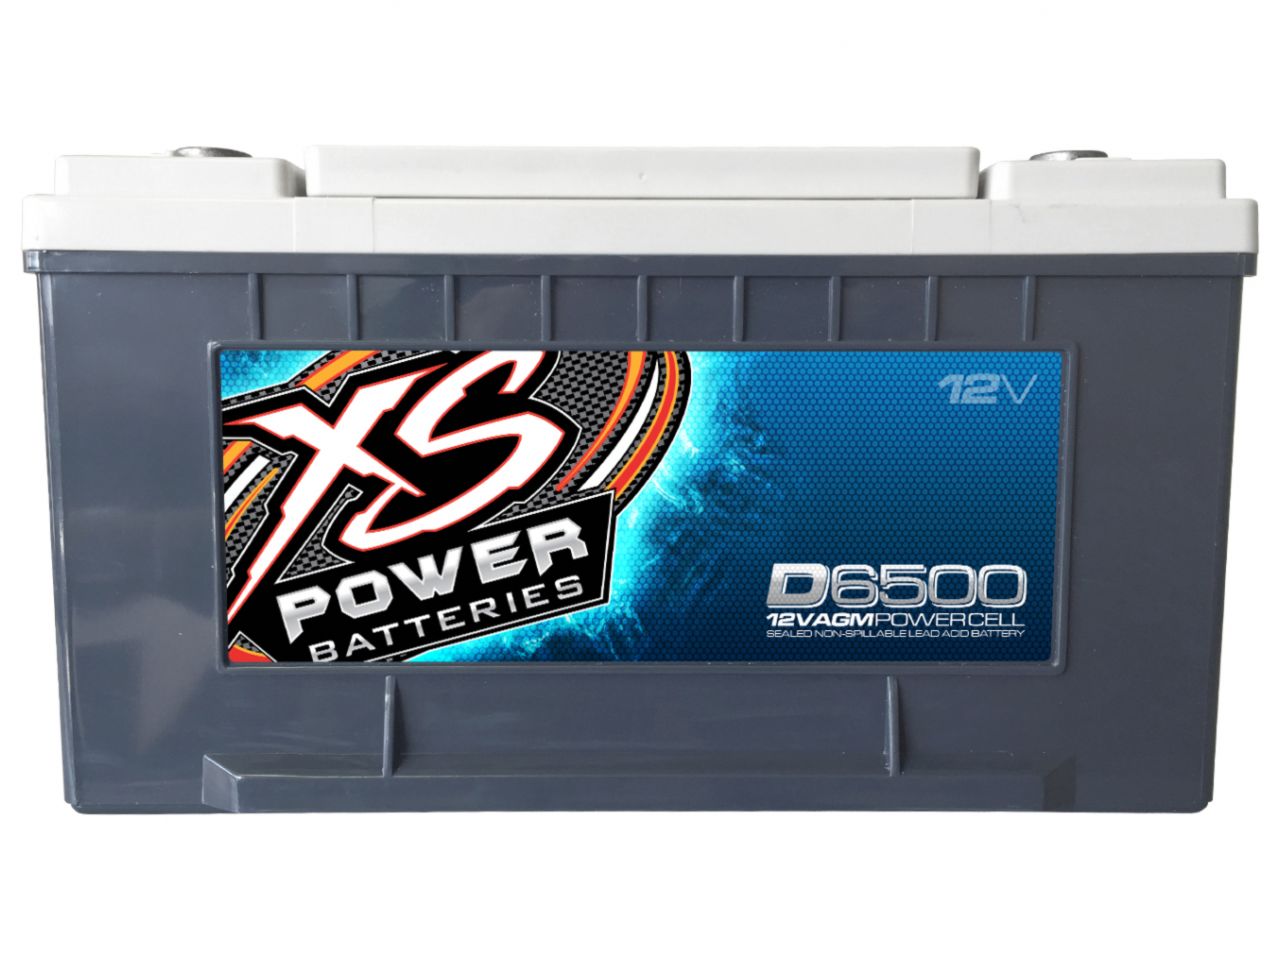 XS Power 12V BCI Group 65 AGM Battery, Max Amps 3,900A, CA: 1070, Ah: 75